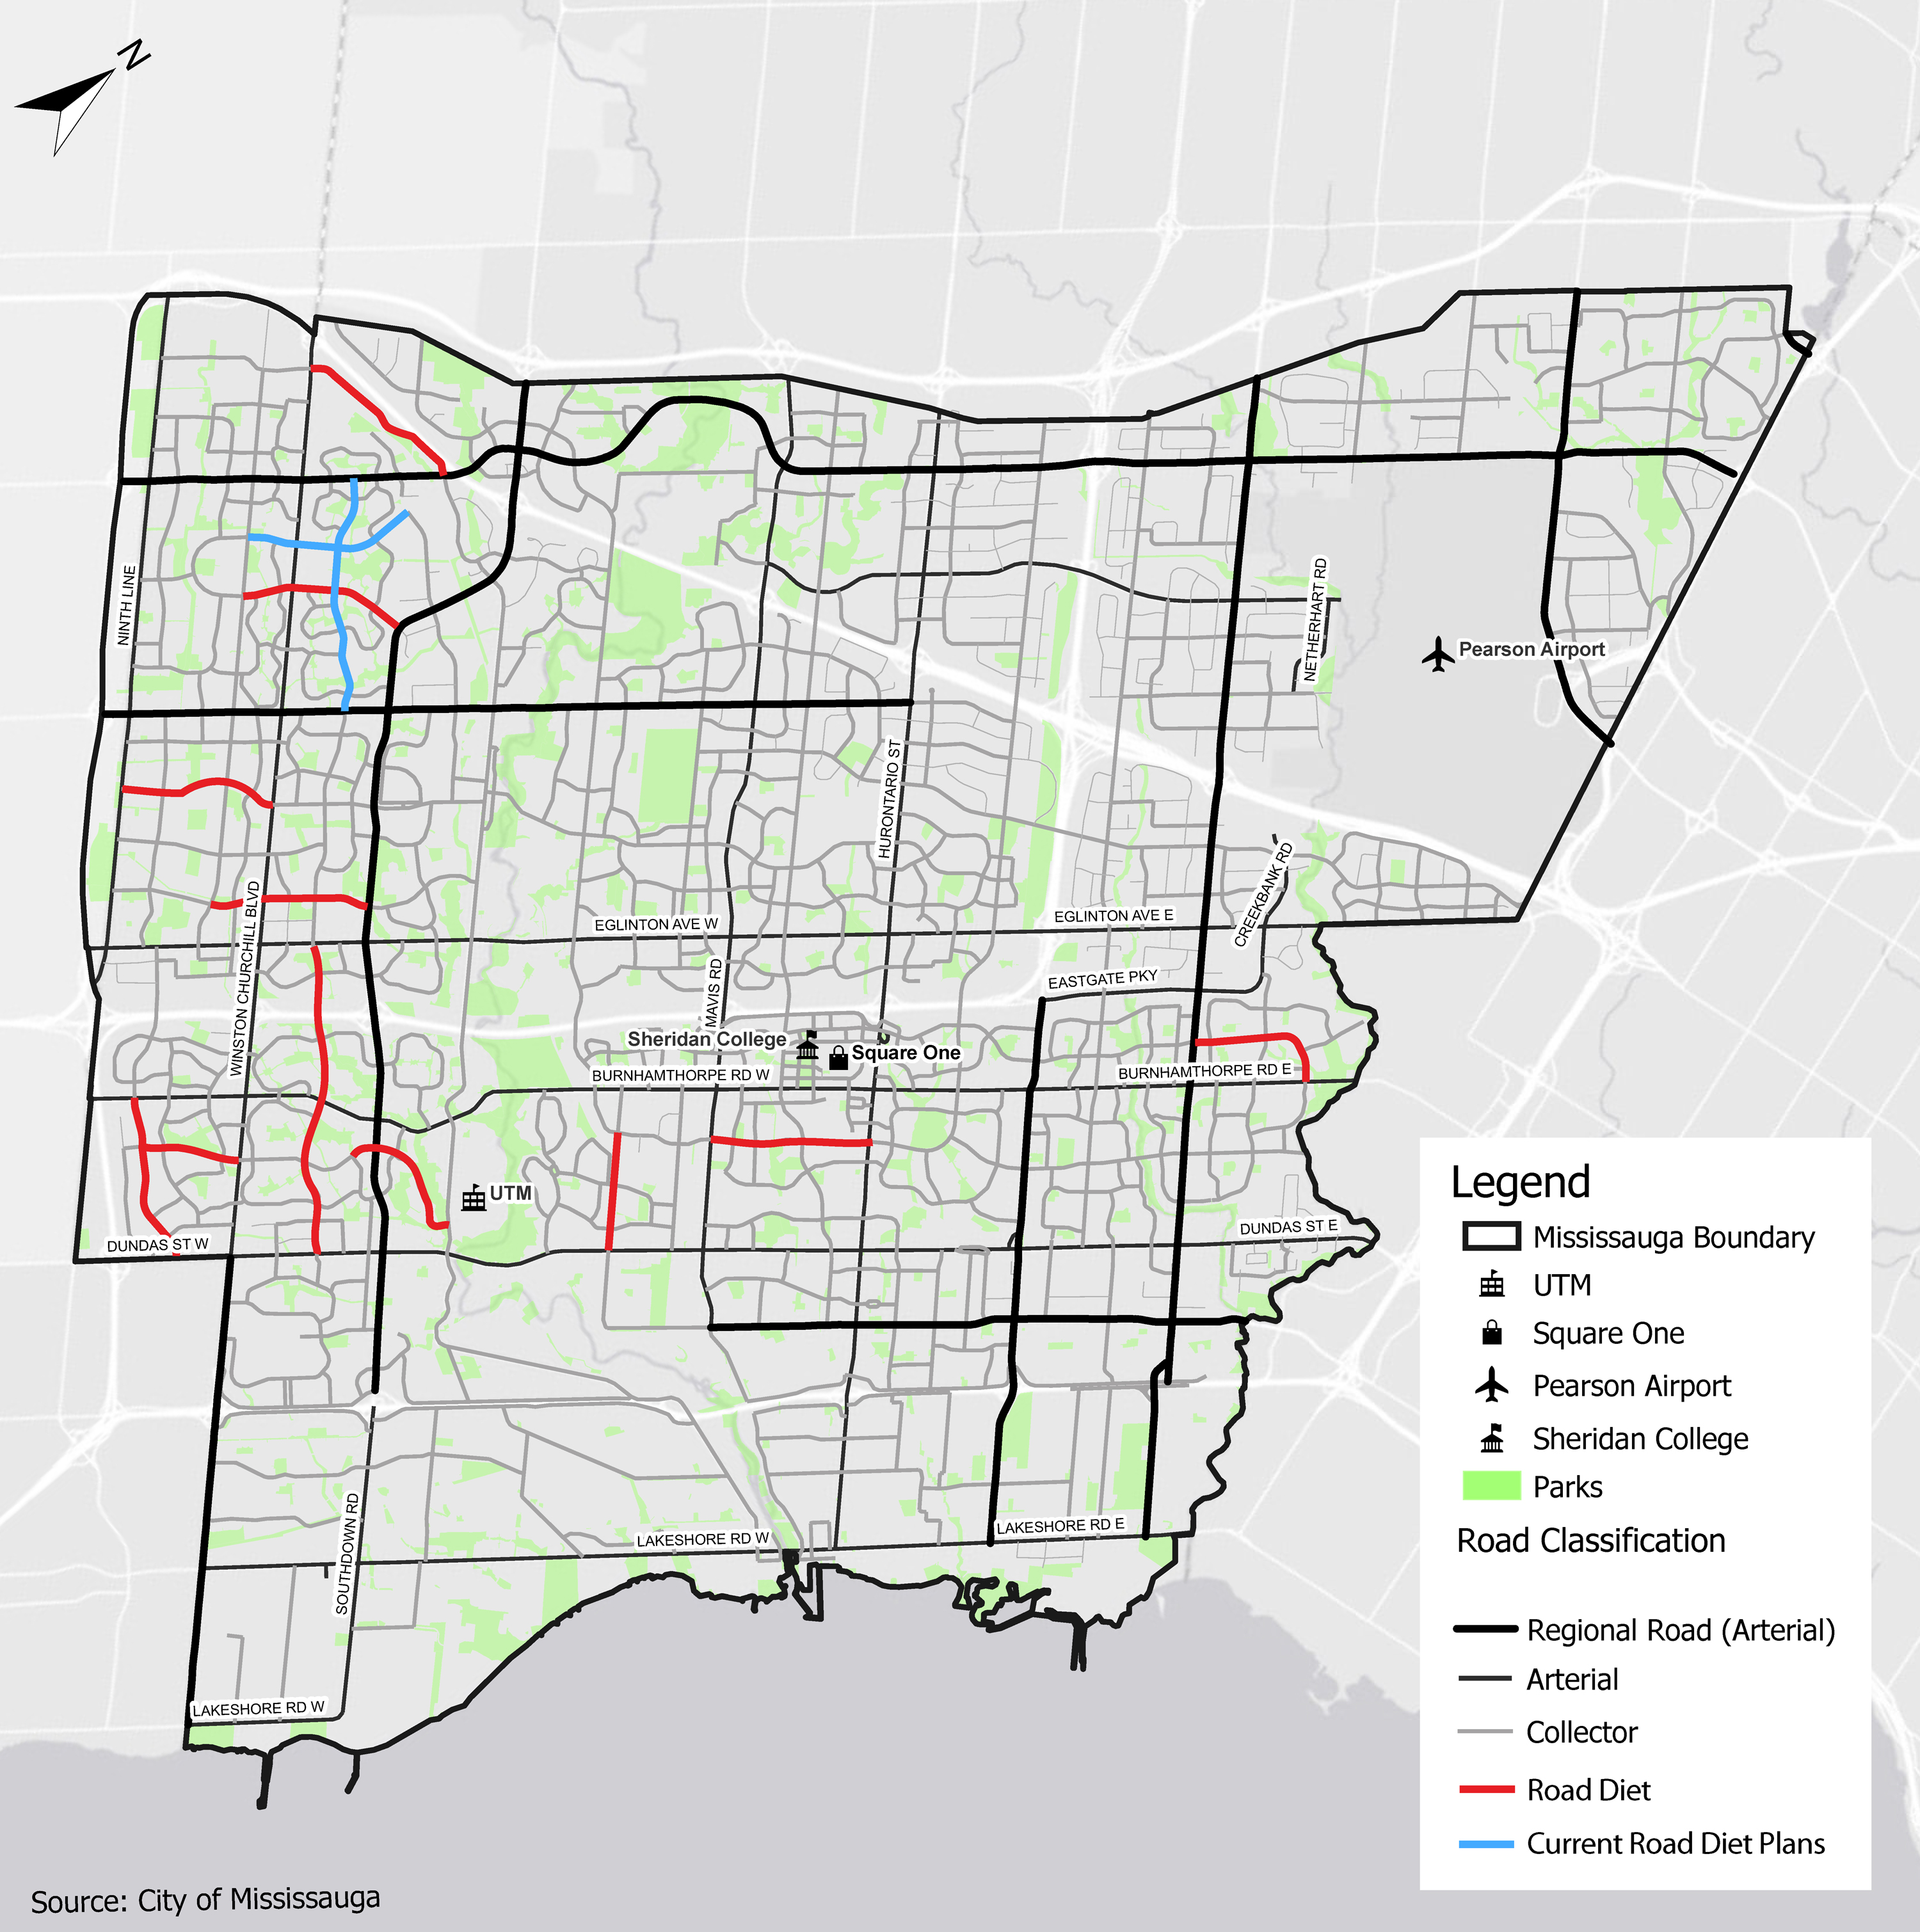 Potential Road Diet Locations